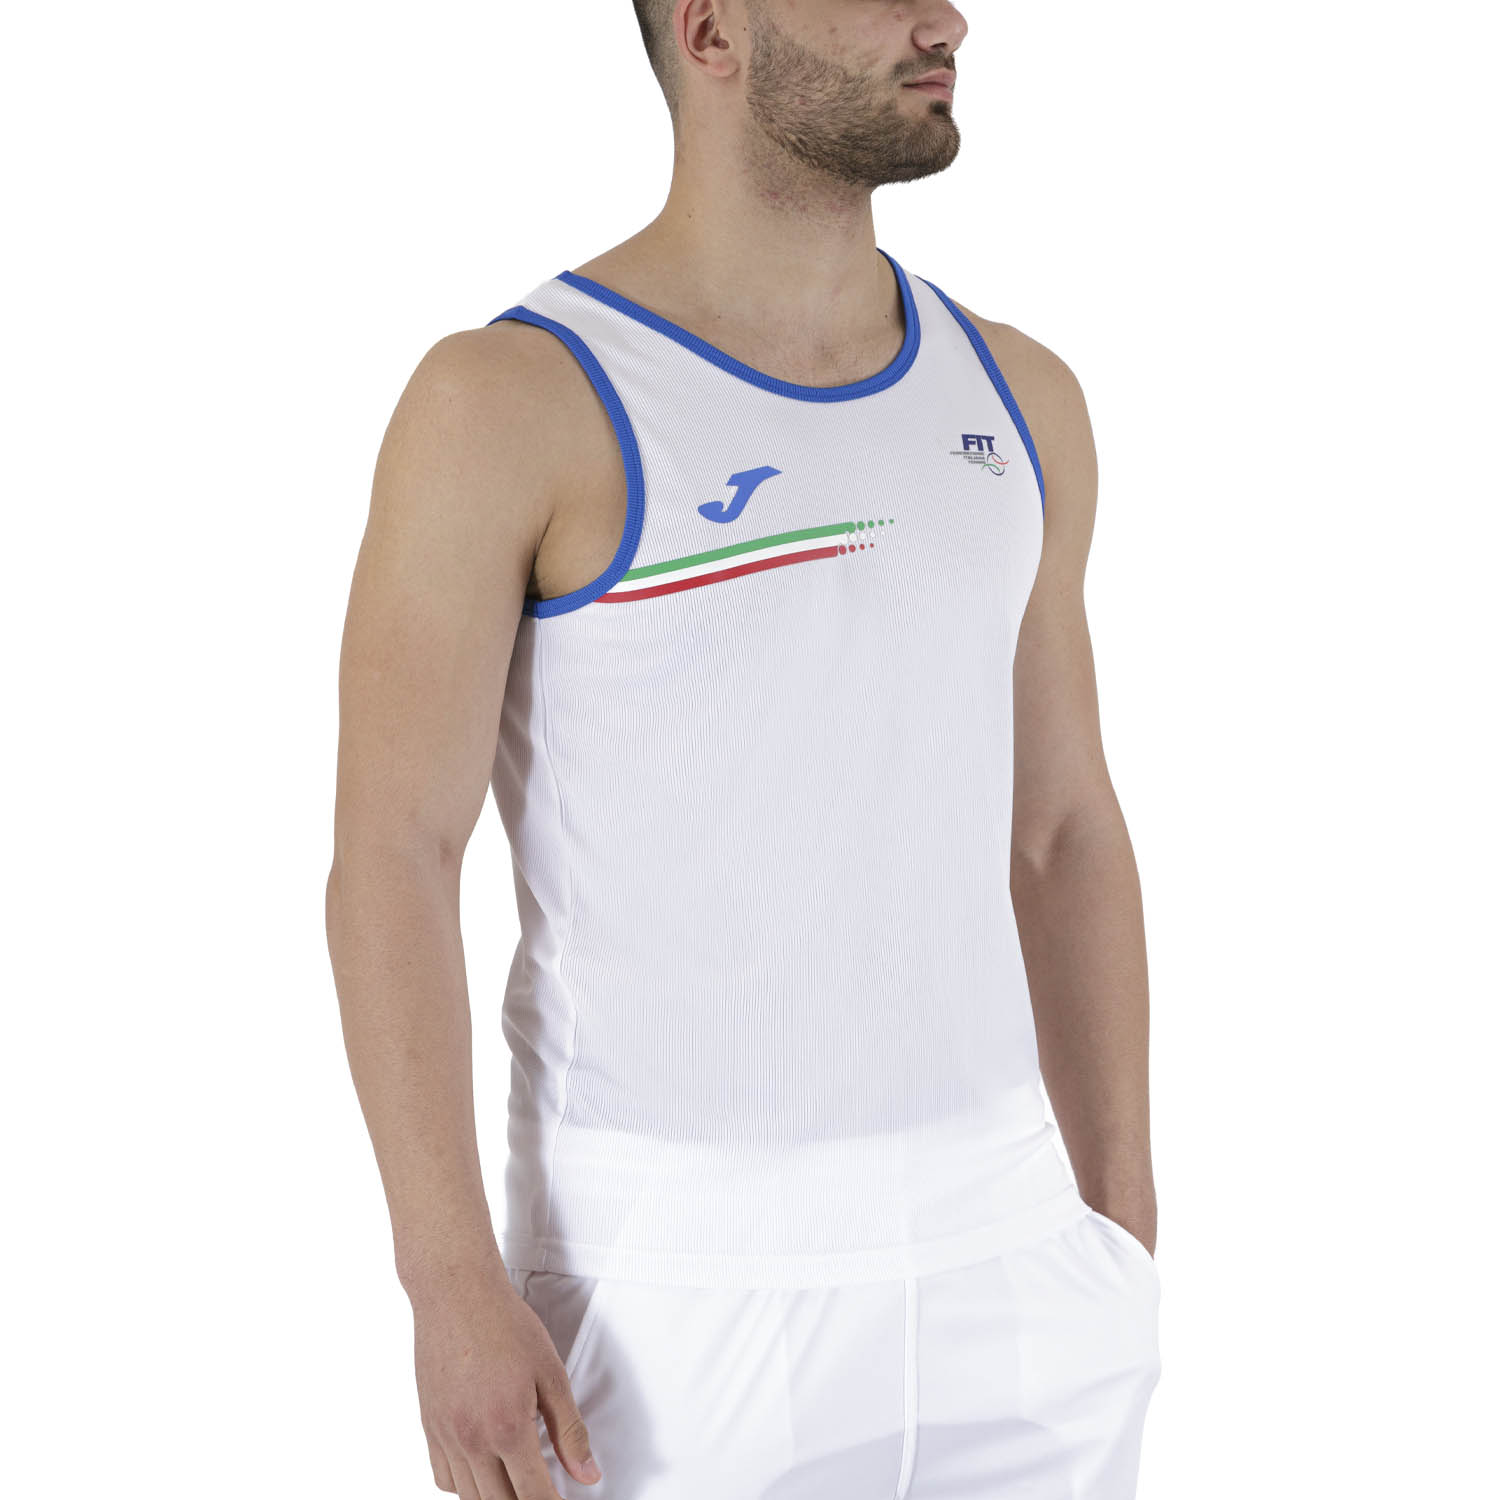 Joma FIT Top - White